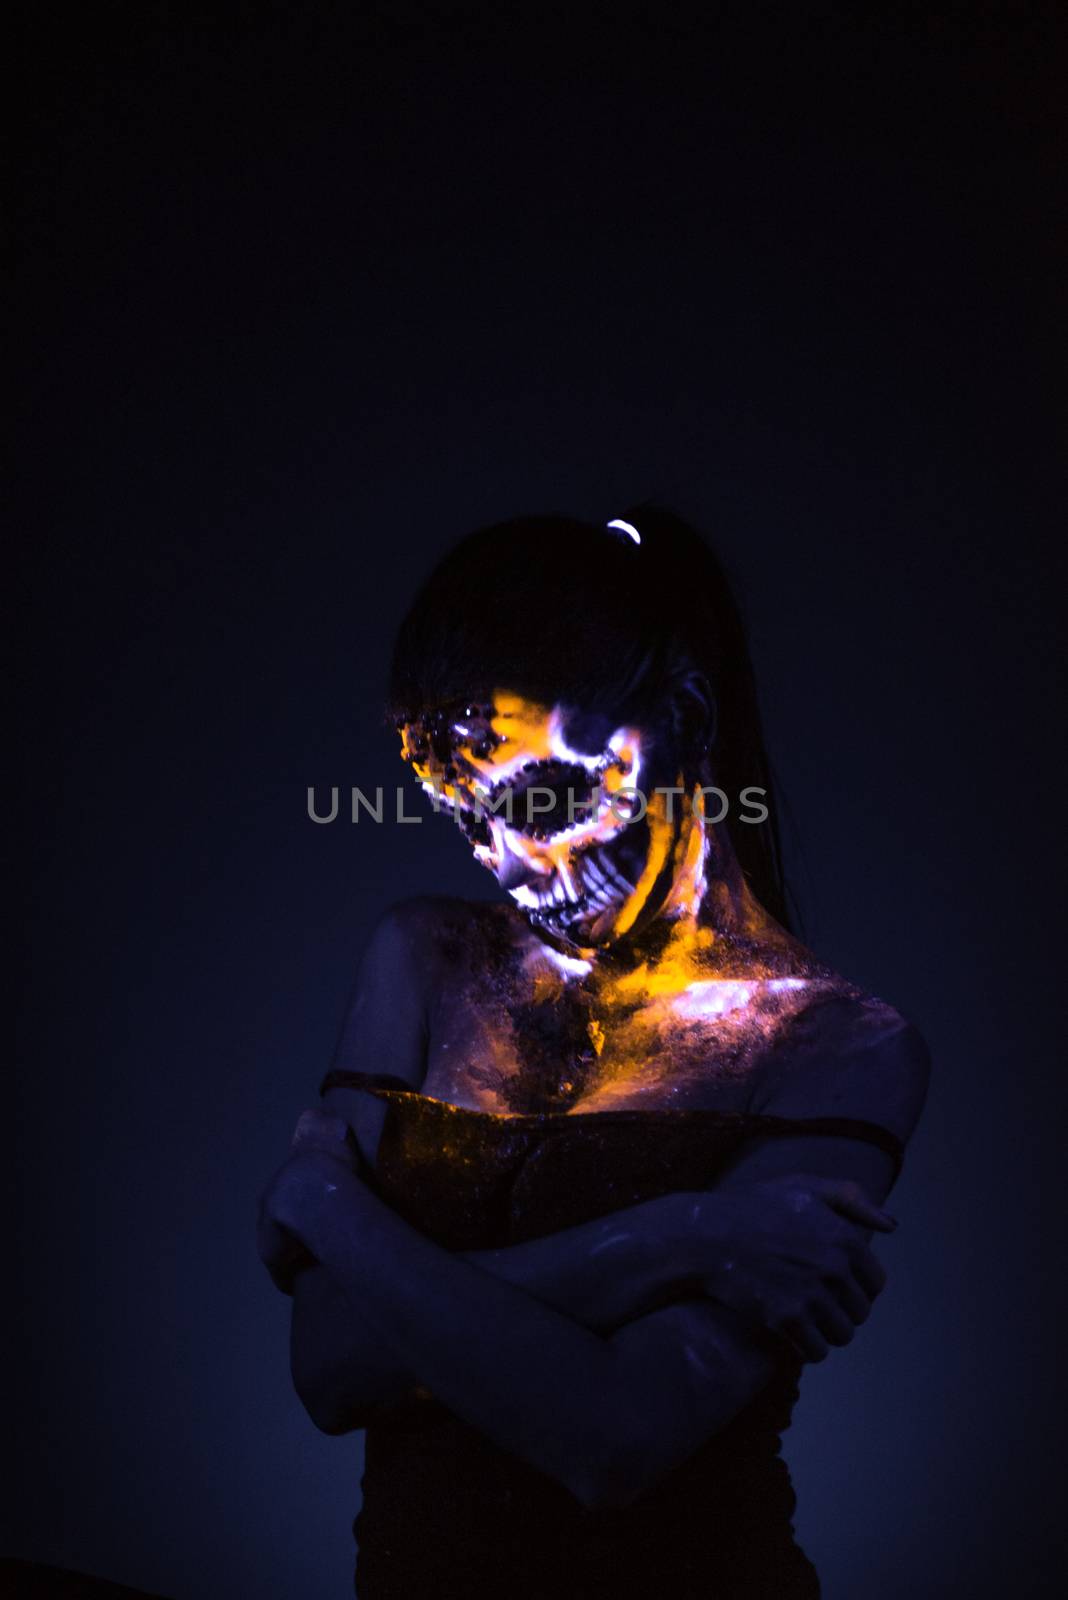 Girl's Face painted in fluorescent UV colors and looks like Neon Glowing Skull